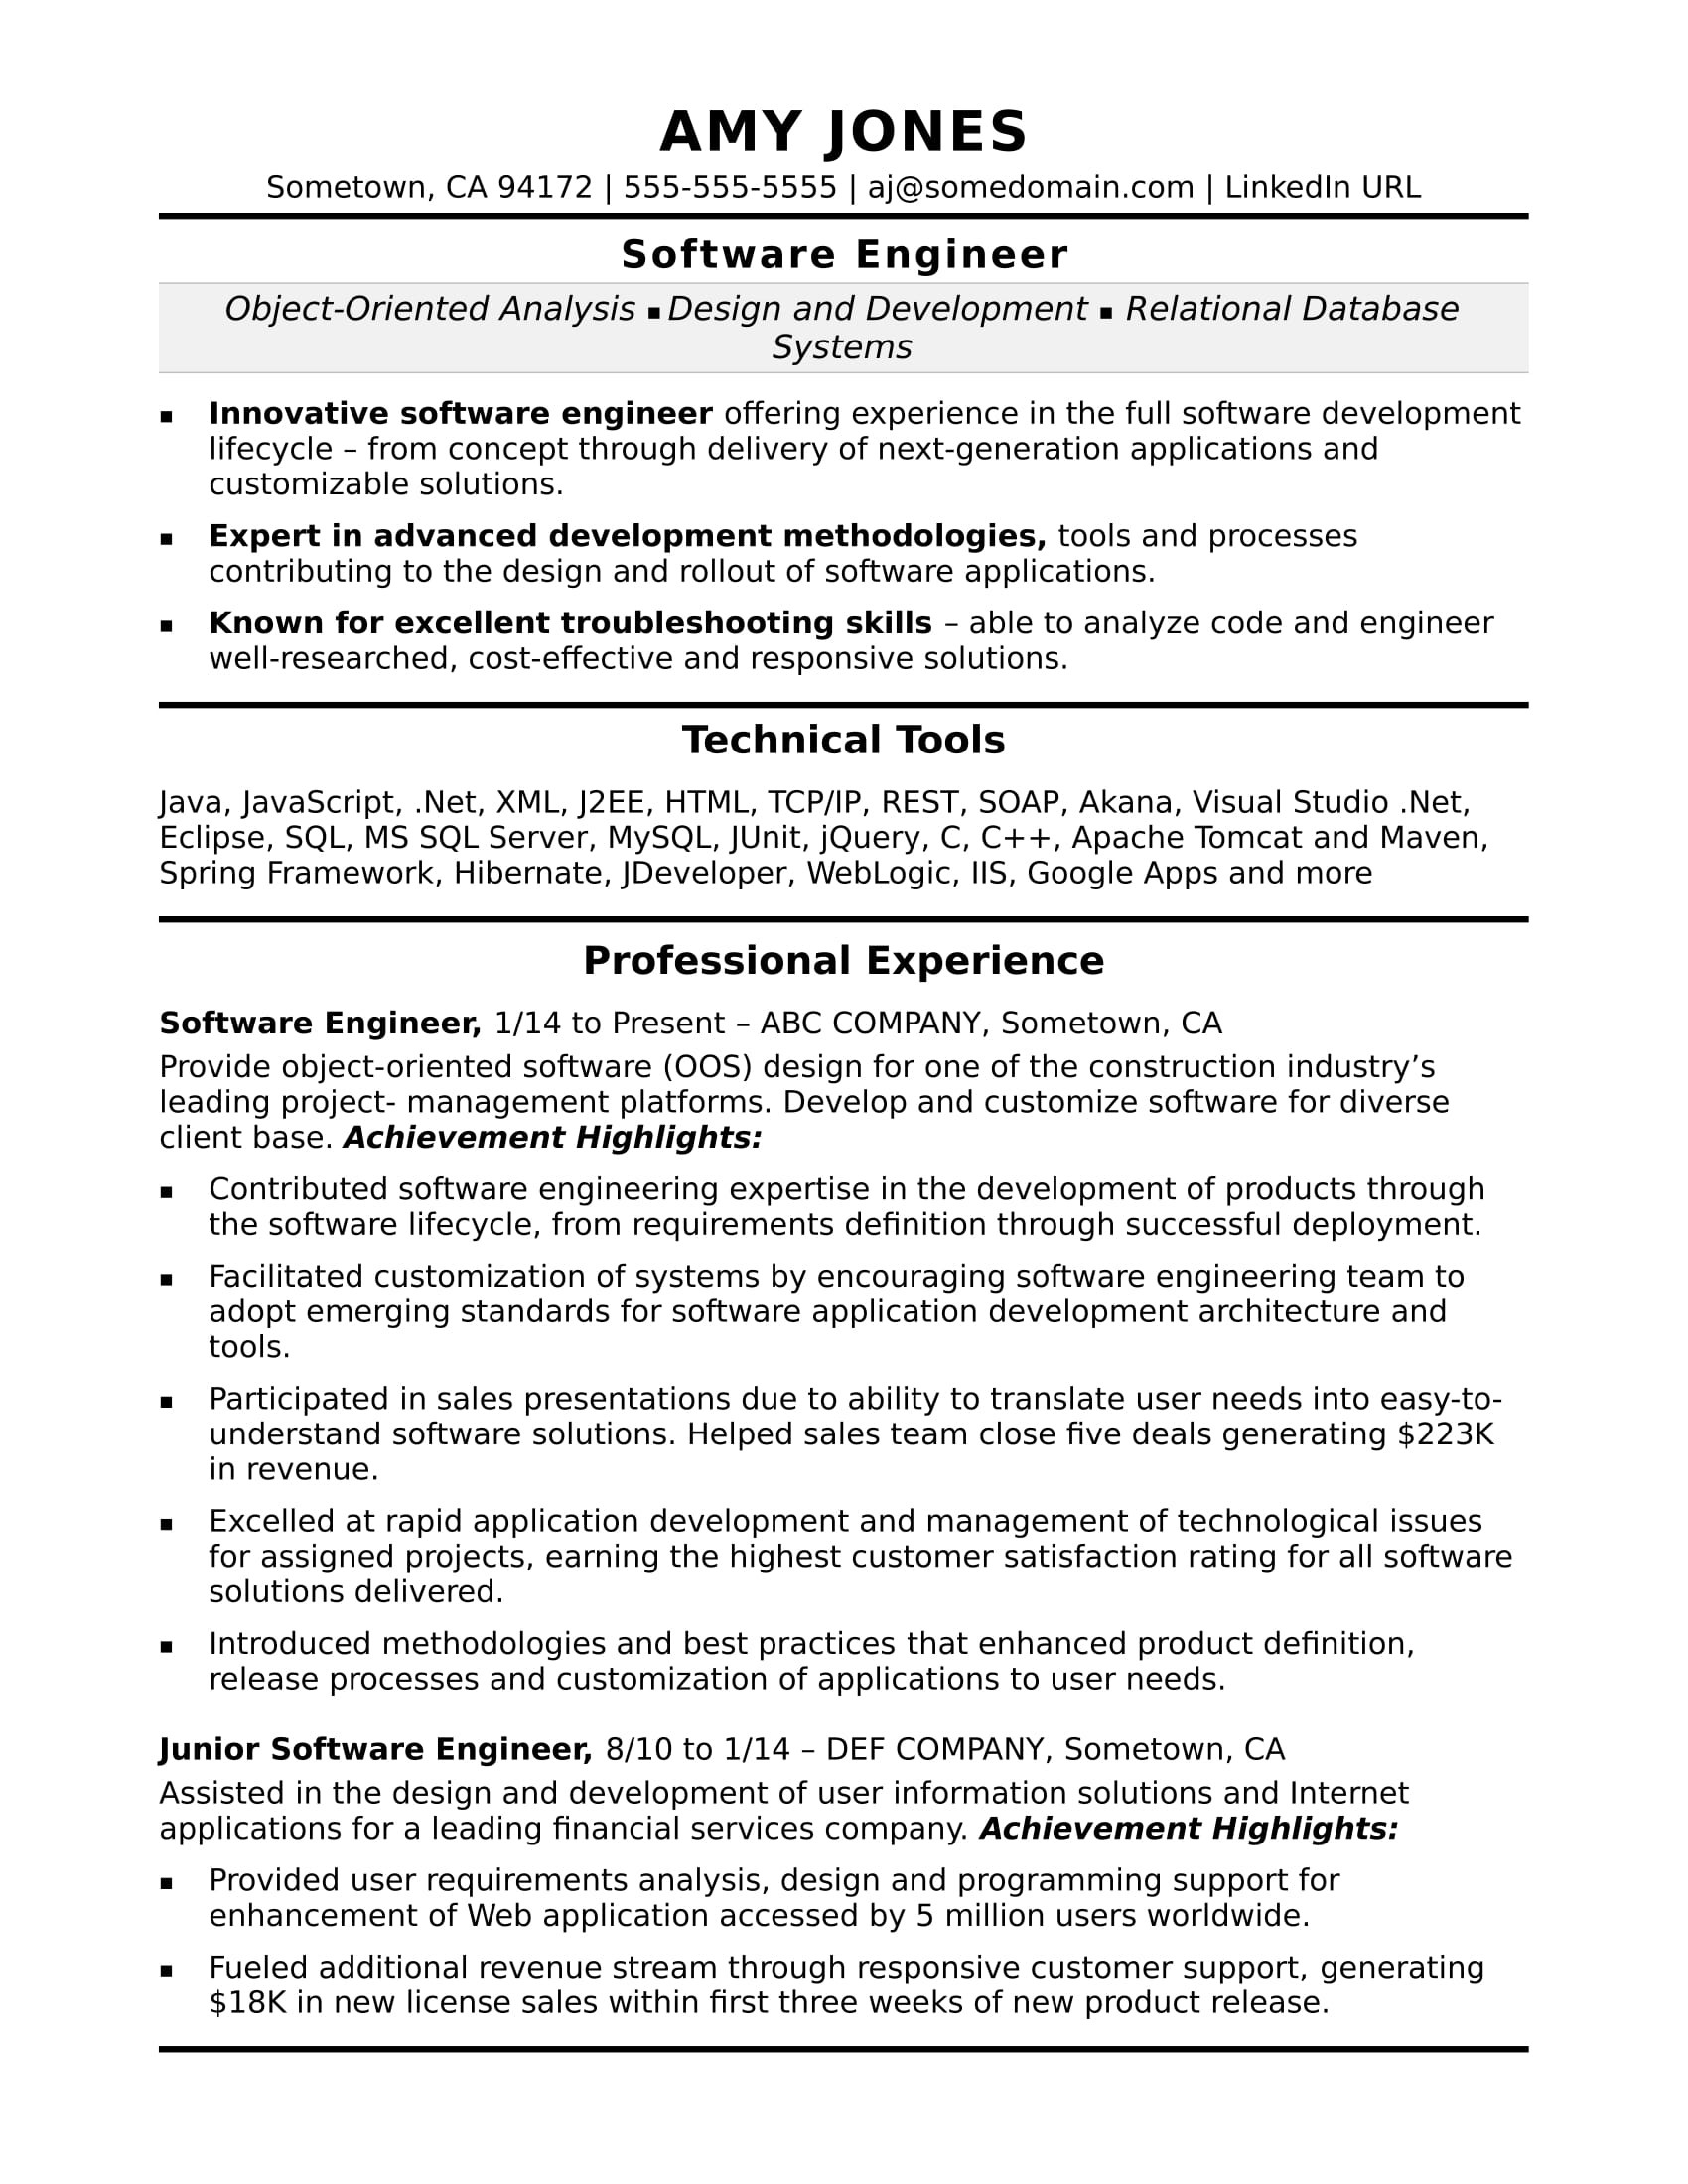 Build and Release Engineer Sample Resumes software Engineer Resume Monster.com